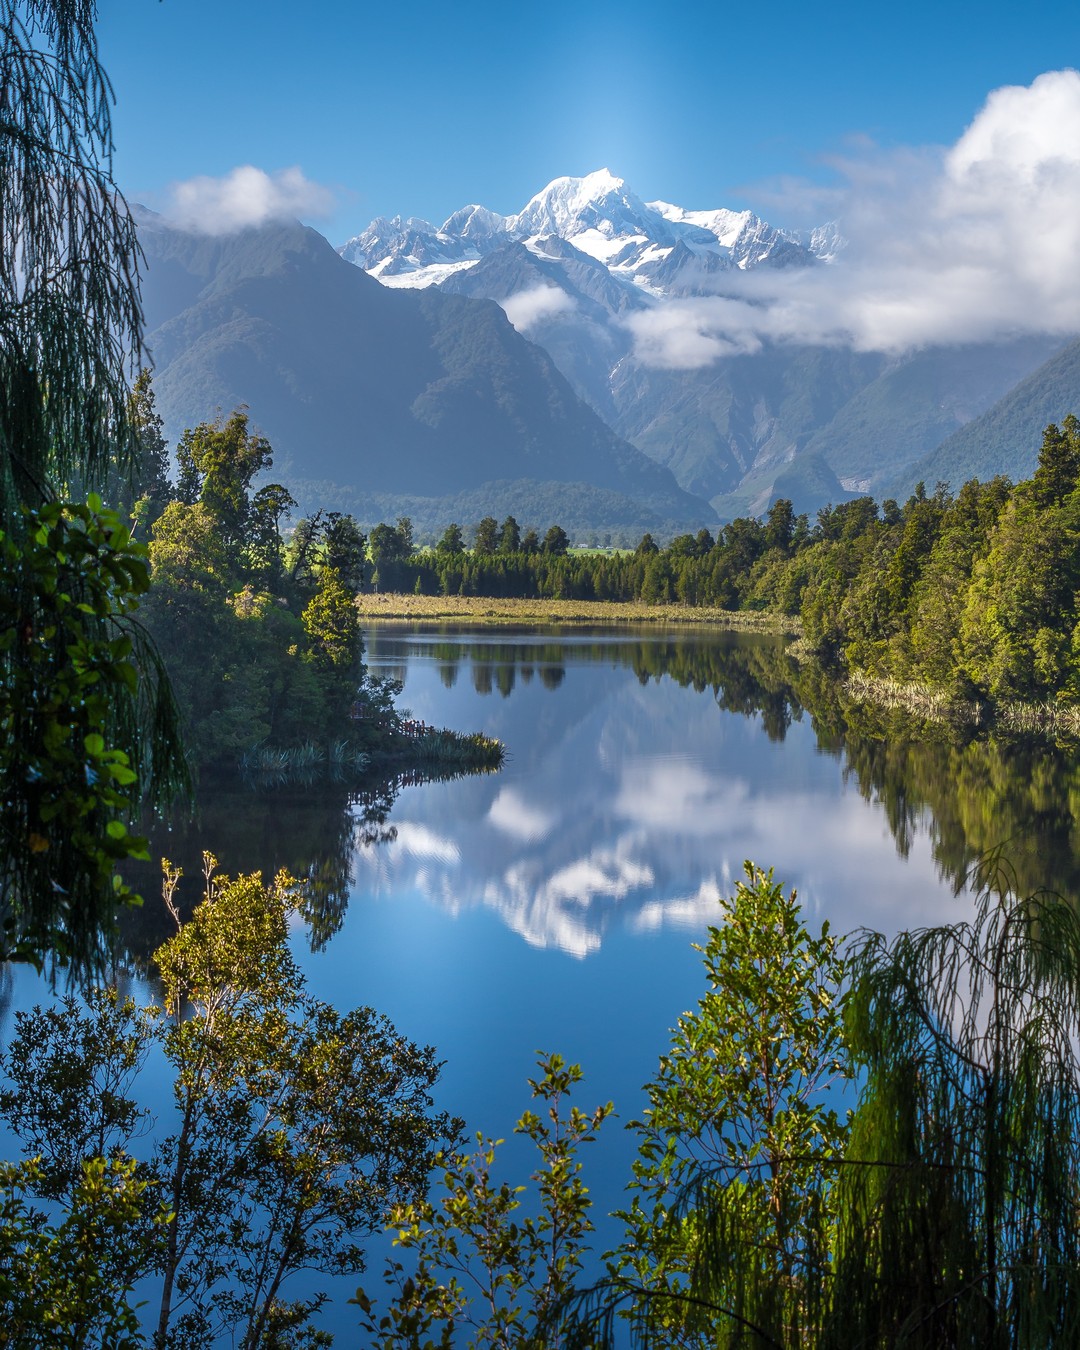 Looking across the still waters of Lake Matheson at New Zealand's highest and second highest mountains, Aoraki/Mount Cook and Mount Tasman, during our tour of the South Island with @gadventures  and @lonelyplanet.⠀
⠀
The gentle hike around Lake Matheson boasts some of the most serene vistas we've ever seen with the Southern Alps majestically reflected in the tranquil waters of the lake. ⠀
-⠀⠀
-⠀⠀
-⠀⠀
-⠀⠀
-⠀⠀
-⠀⠀
#Aoraki #MountCook #mountcooknz #MountTasman #MtCook #SouthernAlps #Matheson #LakeMatheson #FranzJosef #foxglacier #mountcooknationalpark #southislandnewzealand #southisland #southislandnz #newzealand #NZMustDo #RealMiddleEarth #NZ #visitnewzealand #lppathfinders #gadventures #liveoutdoors #bestintravel #thegreatoutdoors #wellhiked #takeahike #hikingadventures #getoutstayout #ig_newzealand #purenewzealand